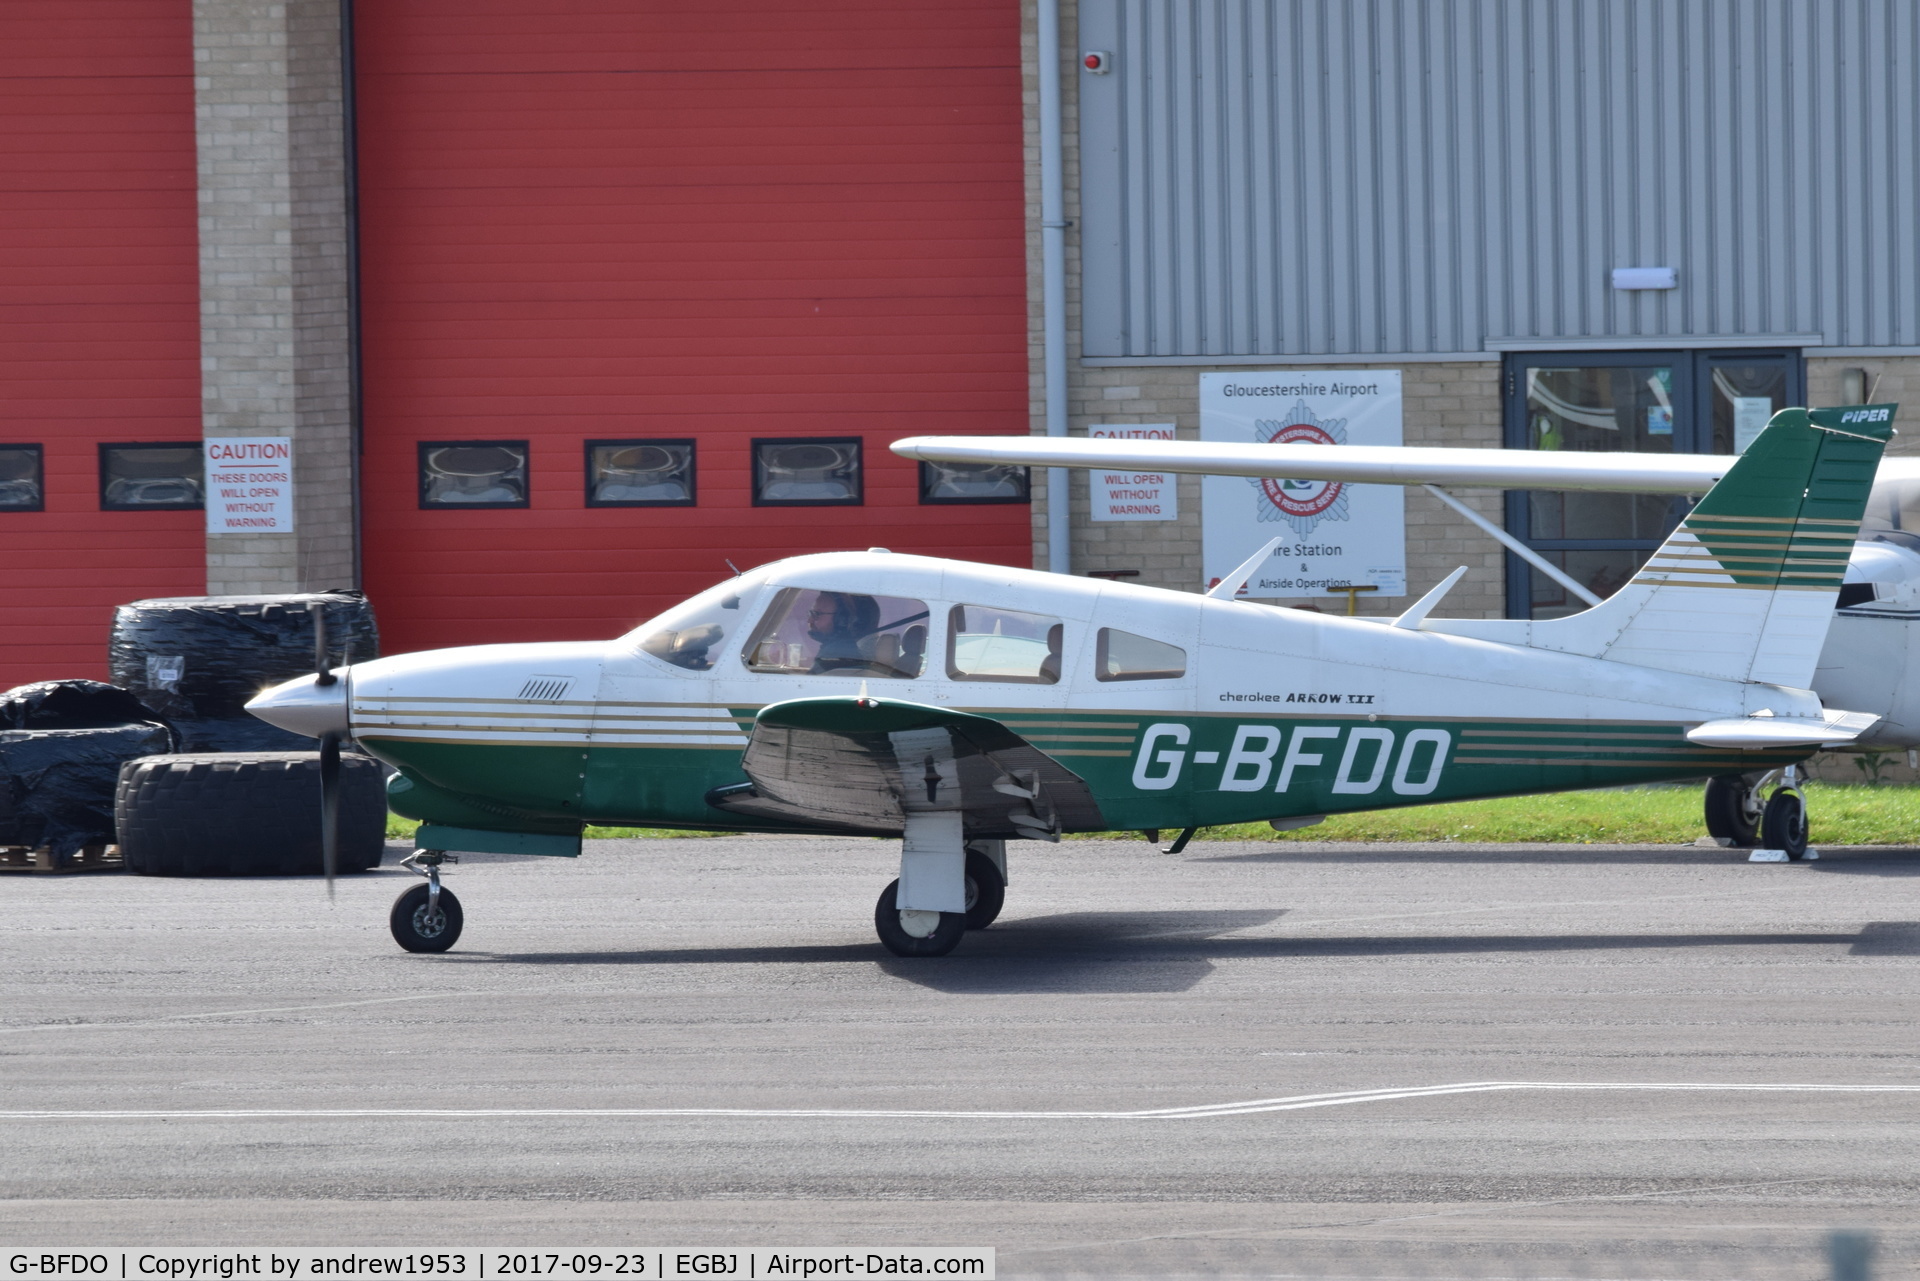 G-BFDO, 1977 Piper PA-28R-201T Cherokee Arrow III C/N 28R-7703212, G-BFDO at Gloucestershire Airport.